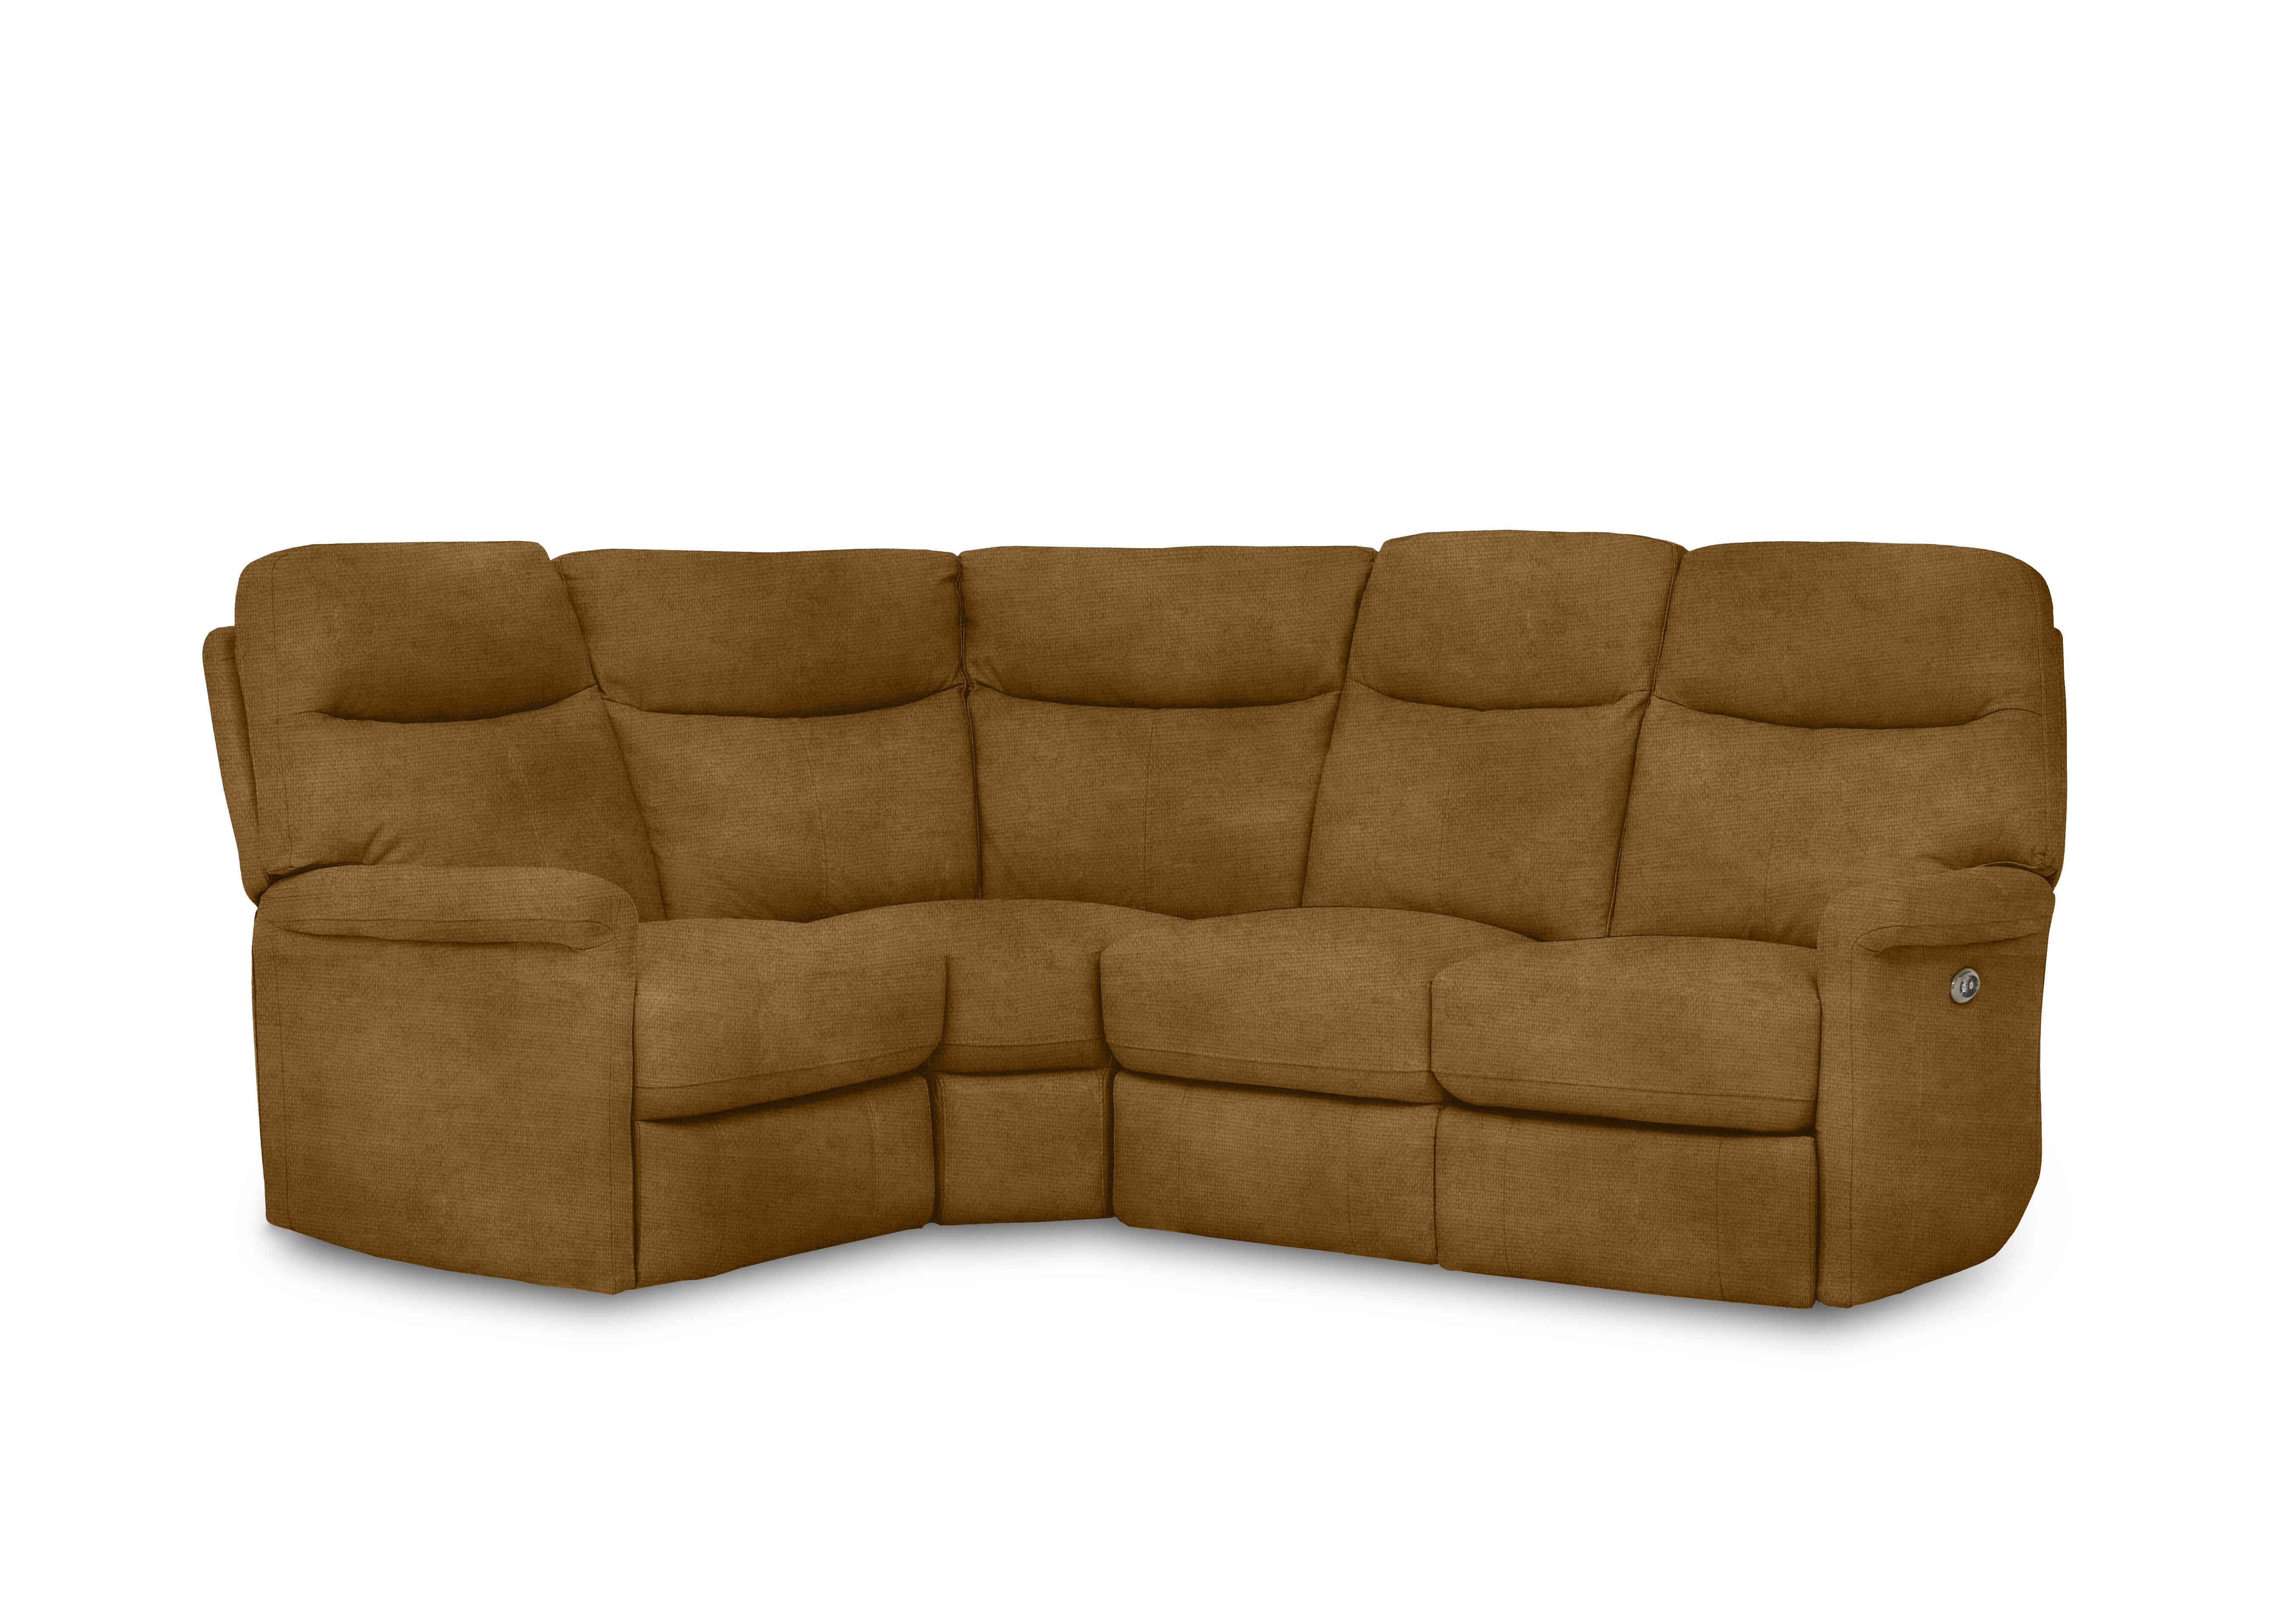 Compact Collection Lille Fabric Corner Sofa in Fab-Coe-R272 Honey Yellow on Furniture Village